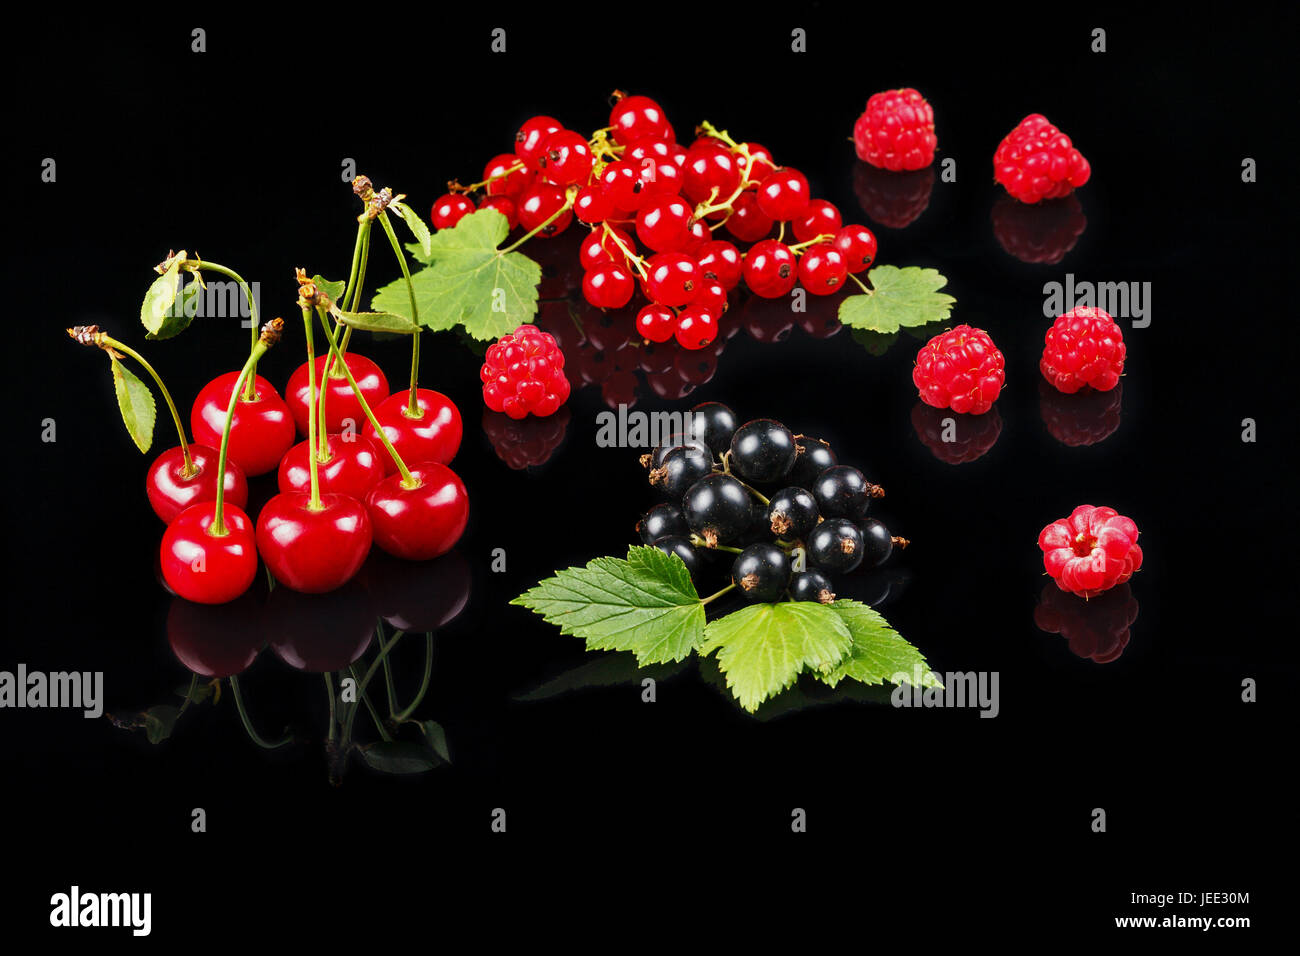 Fruits of cherry, raspberry, black currant and red currant on a dark background. Close-up Stock Photo